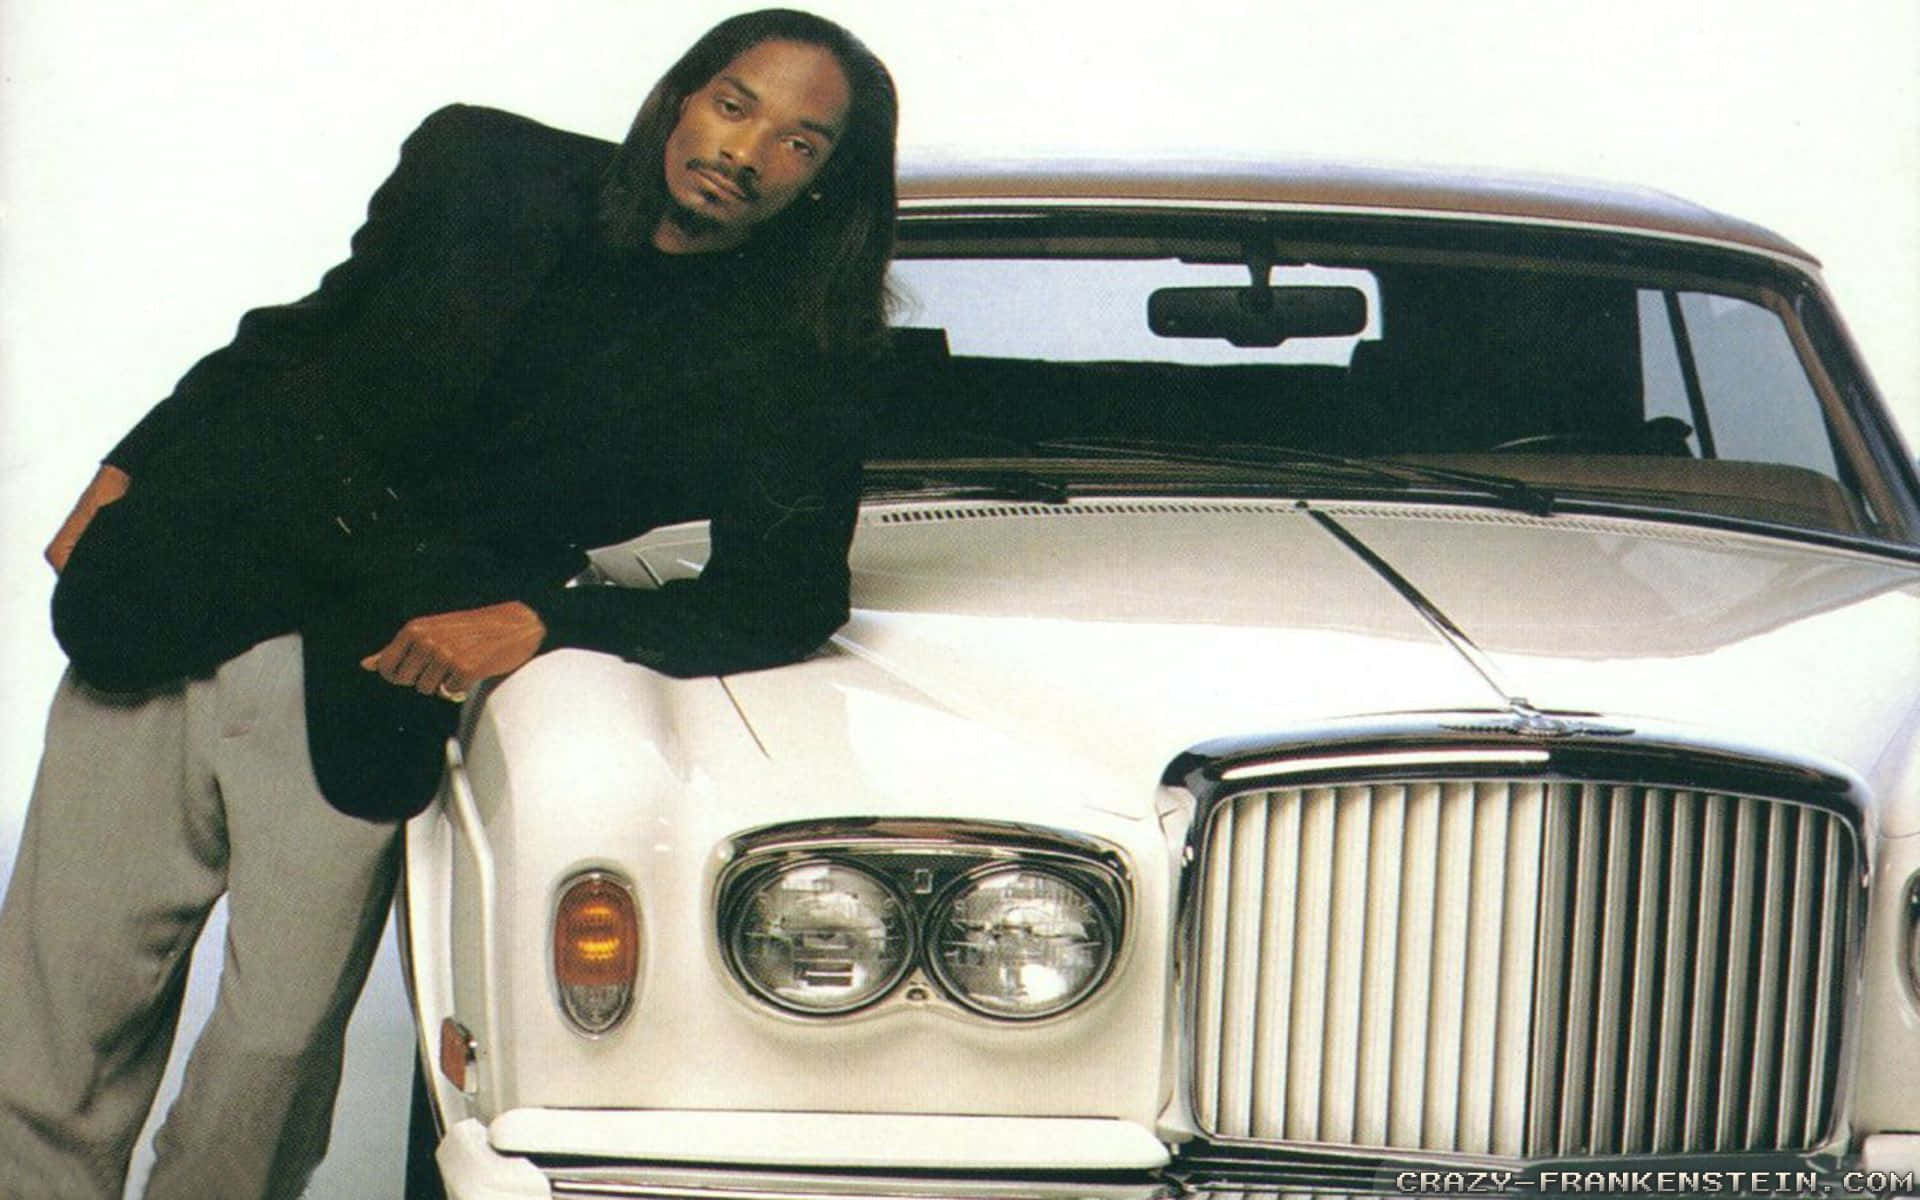 Young Snoop Dogg in his prime Wallpaper